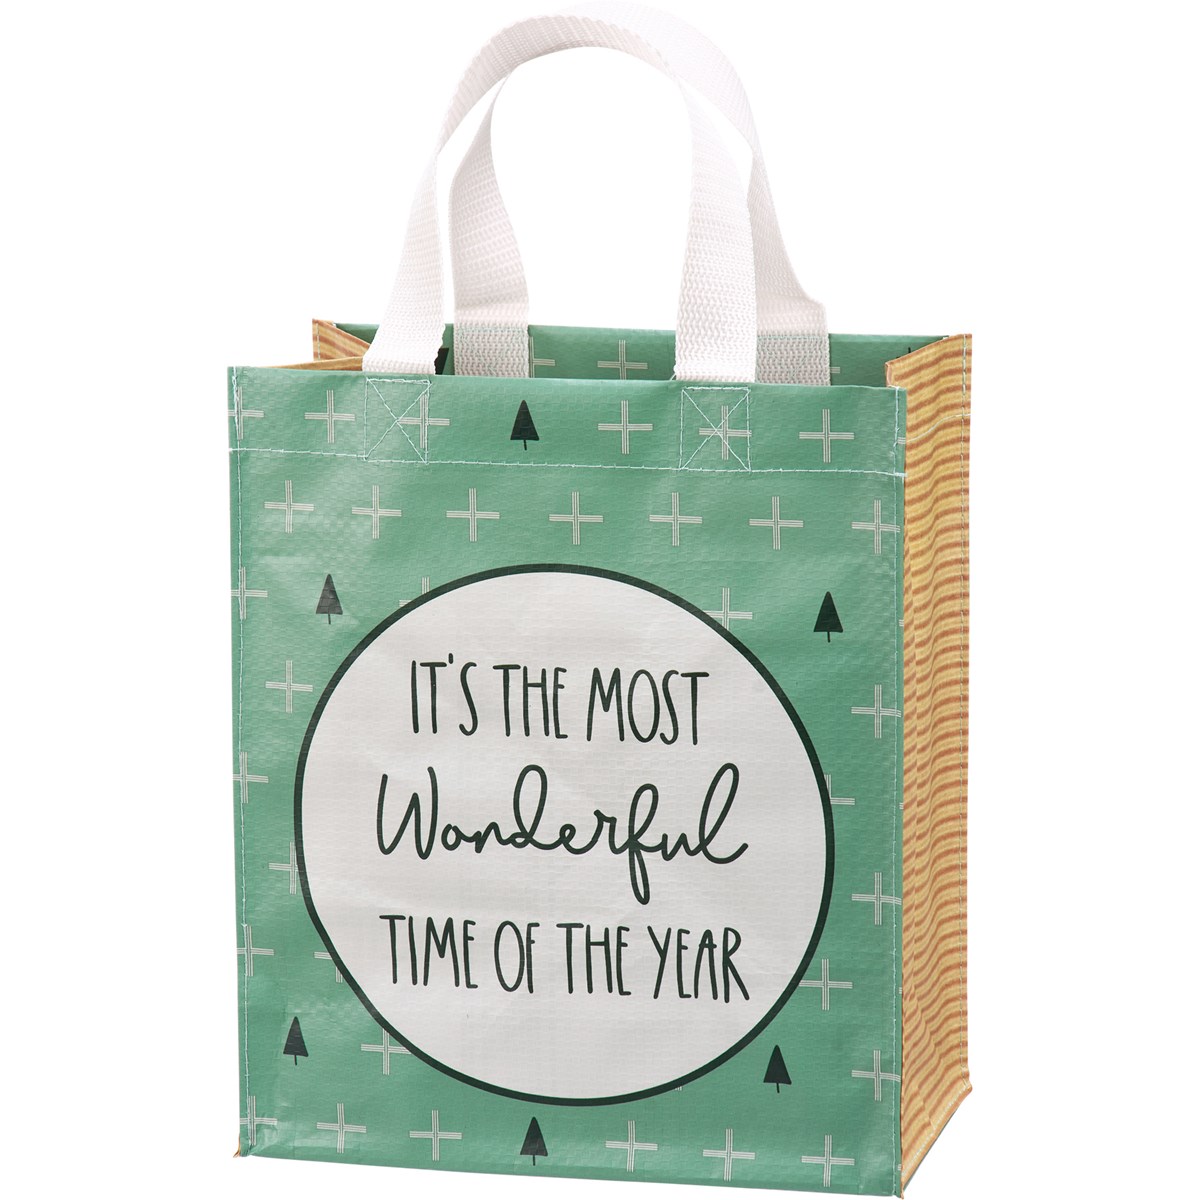 Daily Tote - Most Wonderful Time - 8.75" x 10.25" x 4.75" - Post-Consumer Material, Nylon